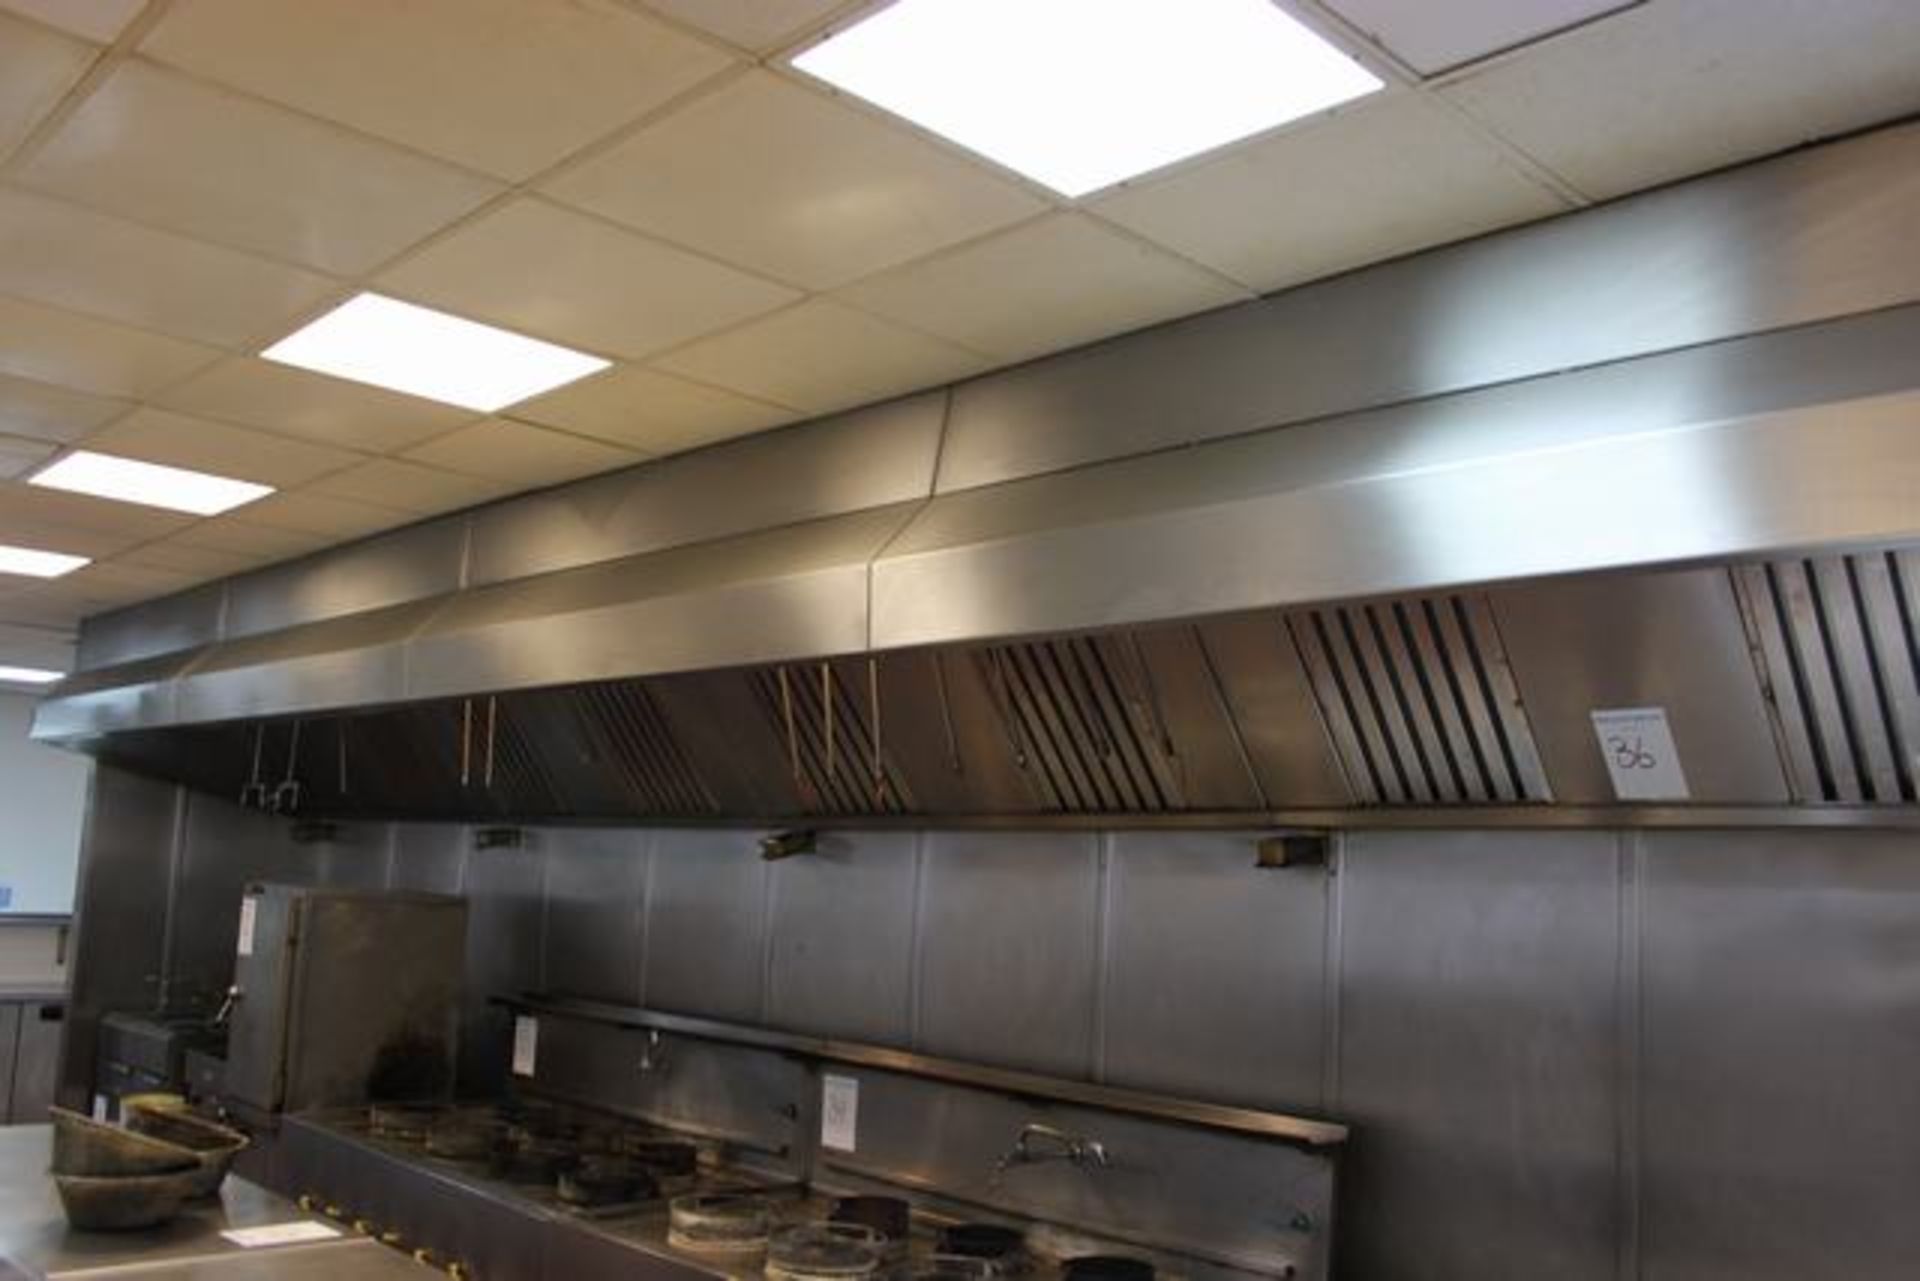 Stainless steel extraction canopy 8 baffle with fire supression system modular in design and